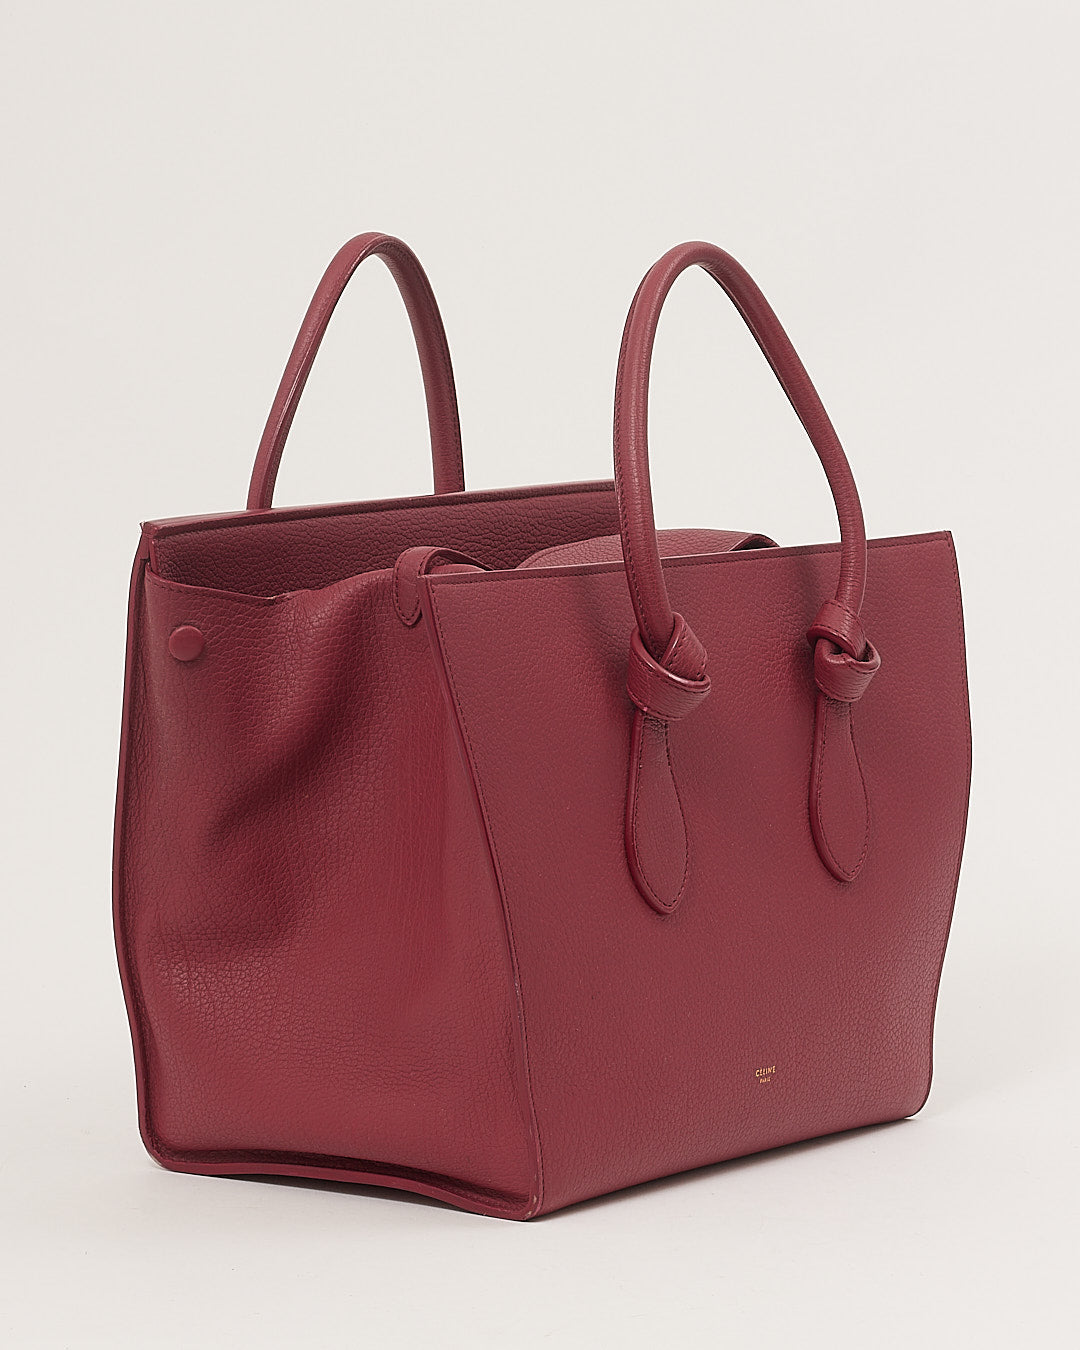 Celine Pink Leather Small Tie Knot Tote Bag